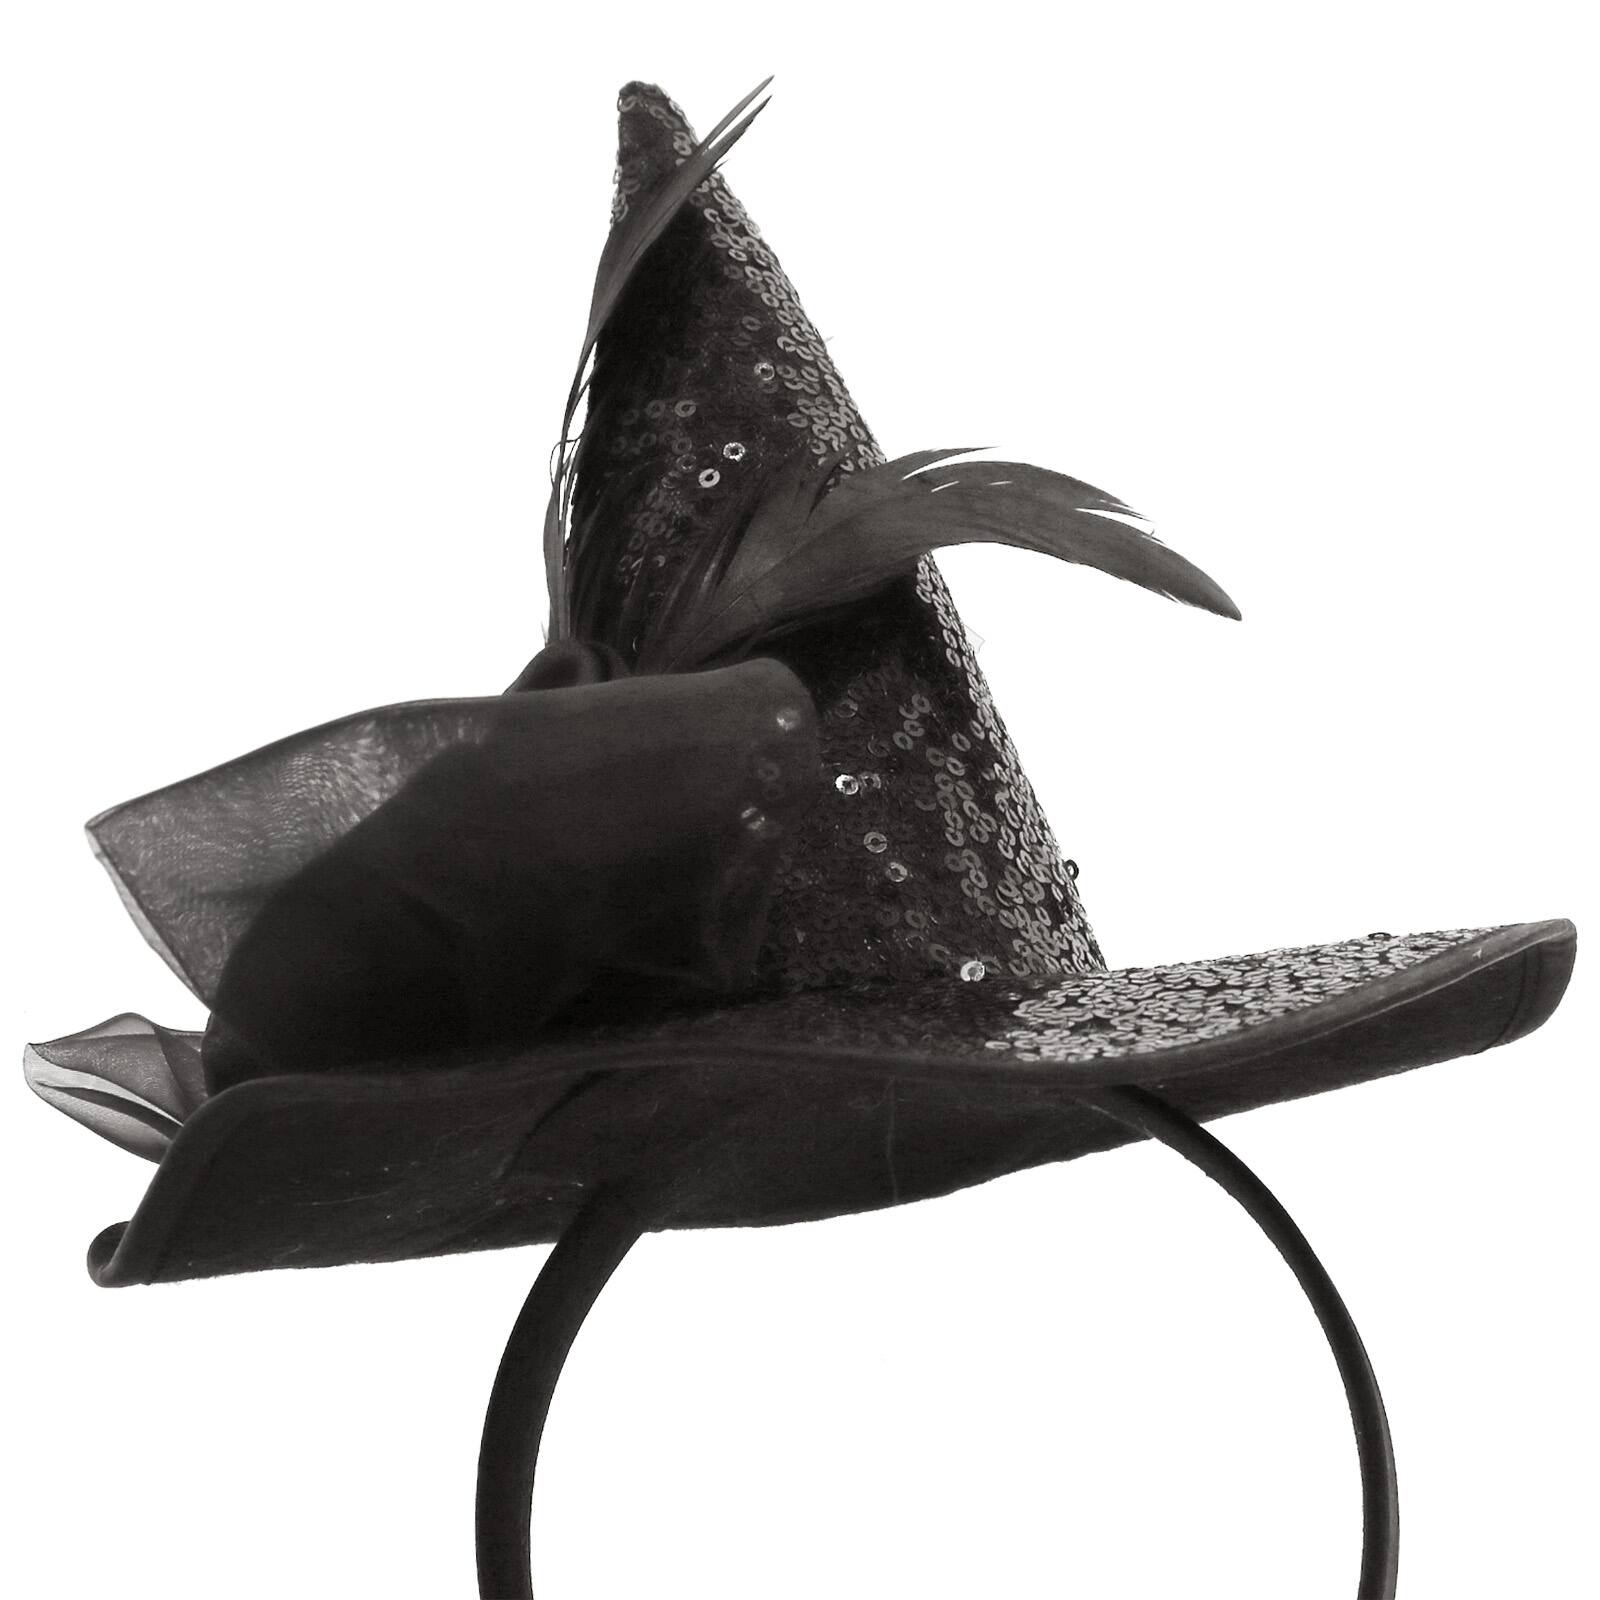 Deluxe Pointed Witch Hat - Glamorous Black Witches Accessories Fancy Velvet  Hat with Flowers, Beads and Purple Feathers